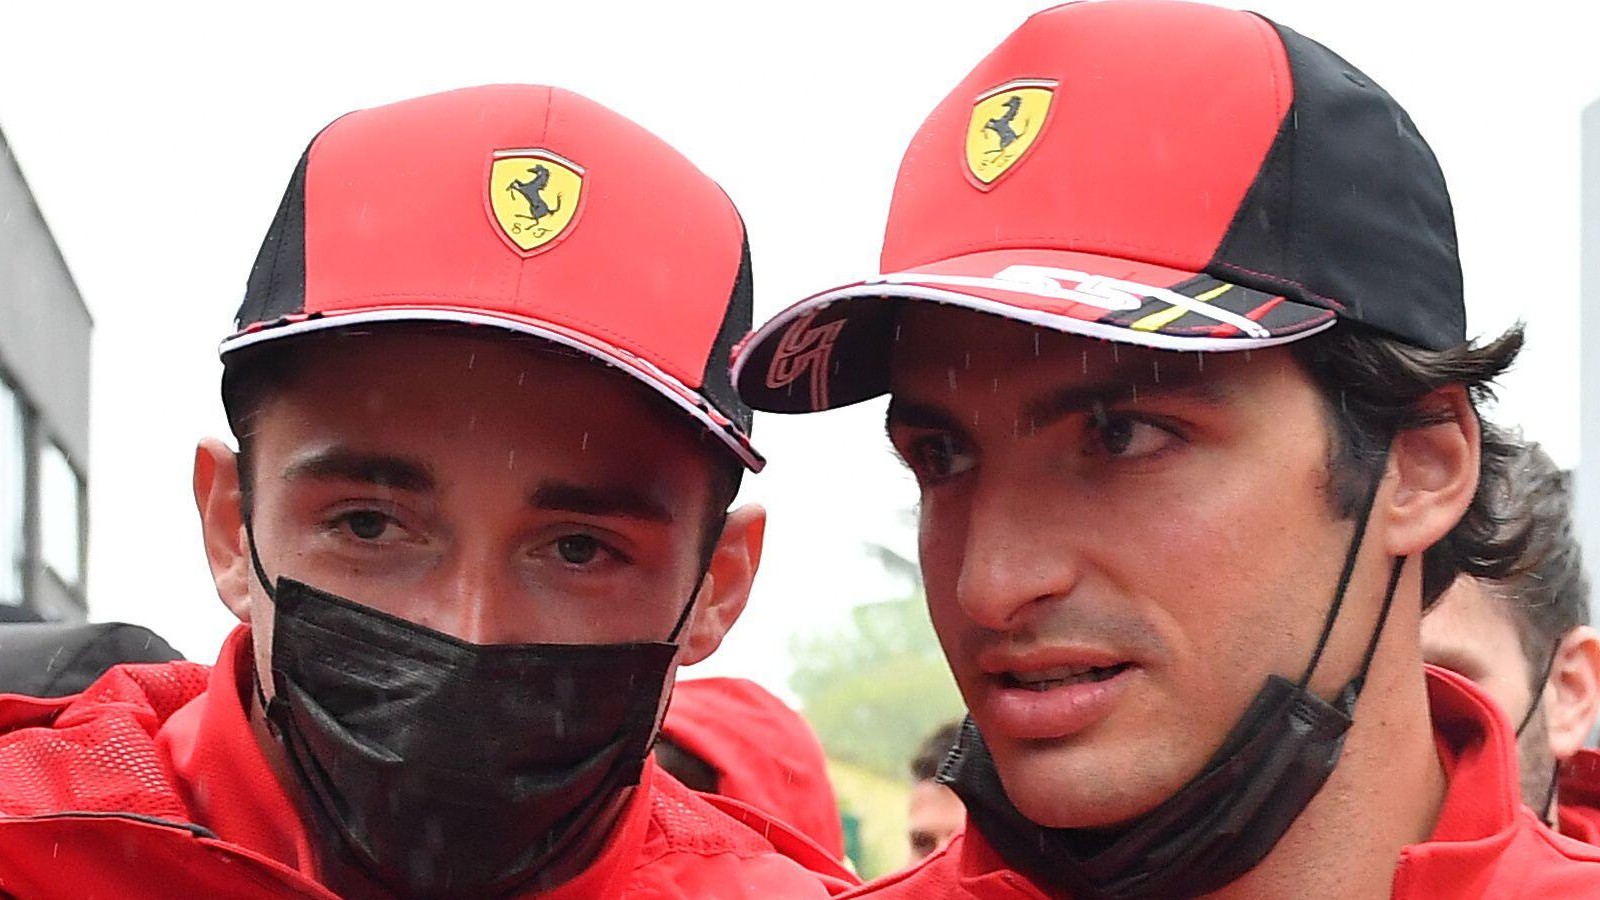 Charles Leclerc and Carlos Sainz, Ferrari, stand together. Italy, April 2022.